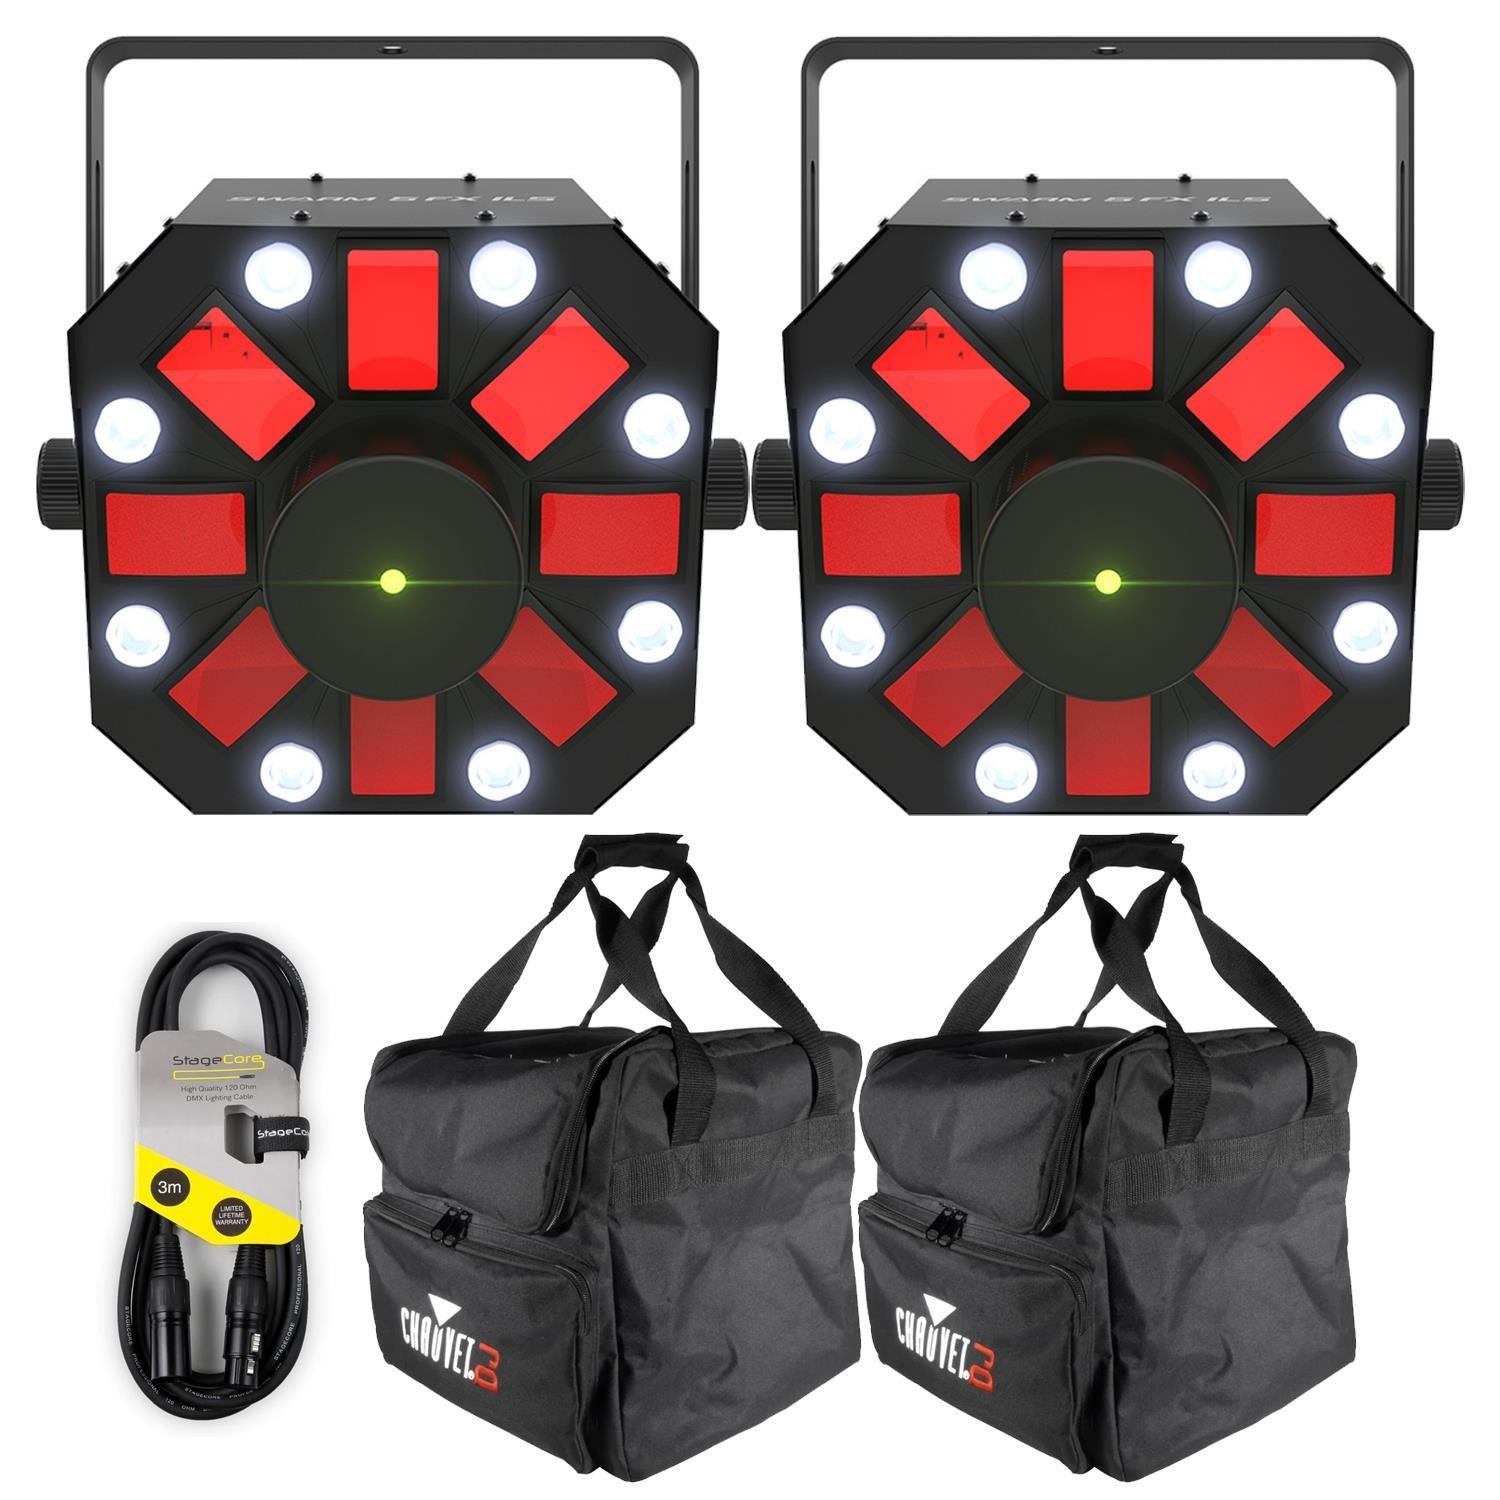 2 x Chauvet DJ Swarm 5 ILS FX 3-in-1 Lighting Effect with Carry Bags and Cable - DY Pro Audio